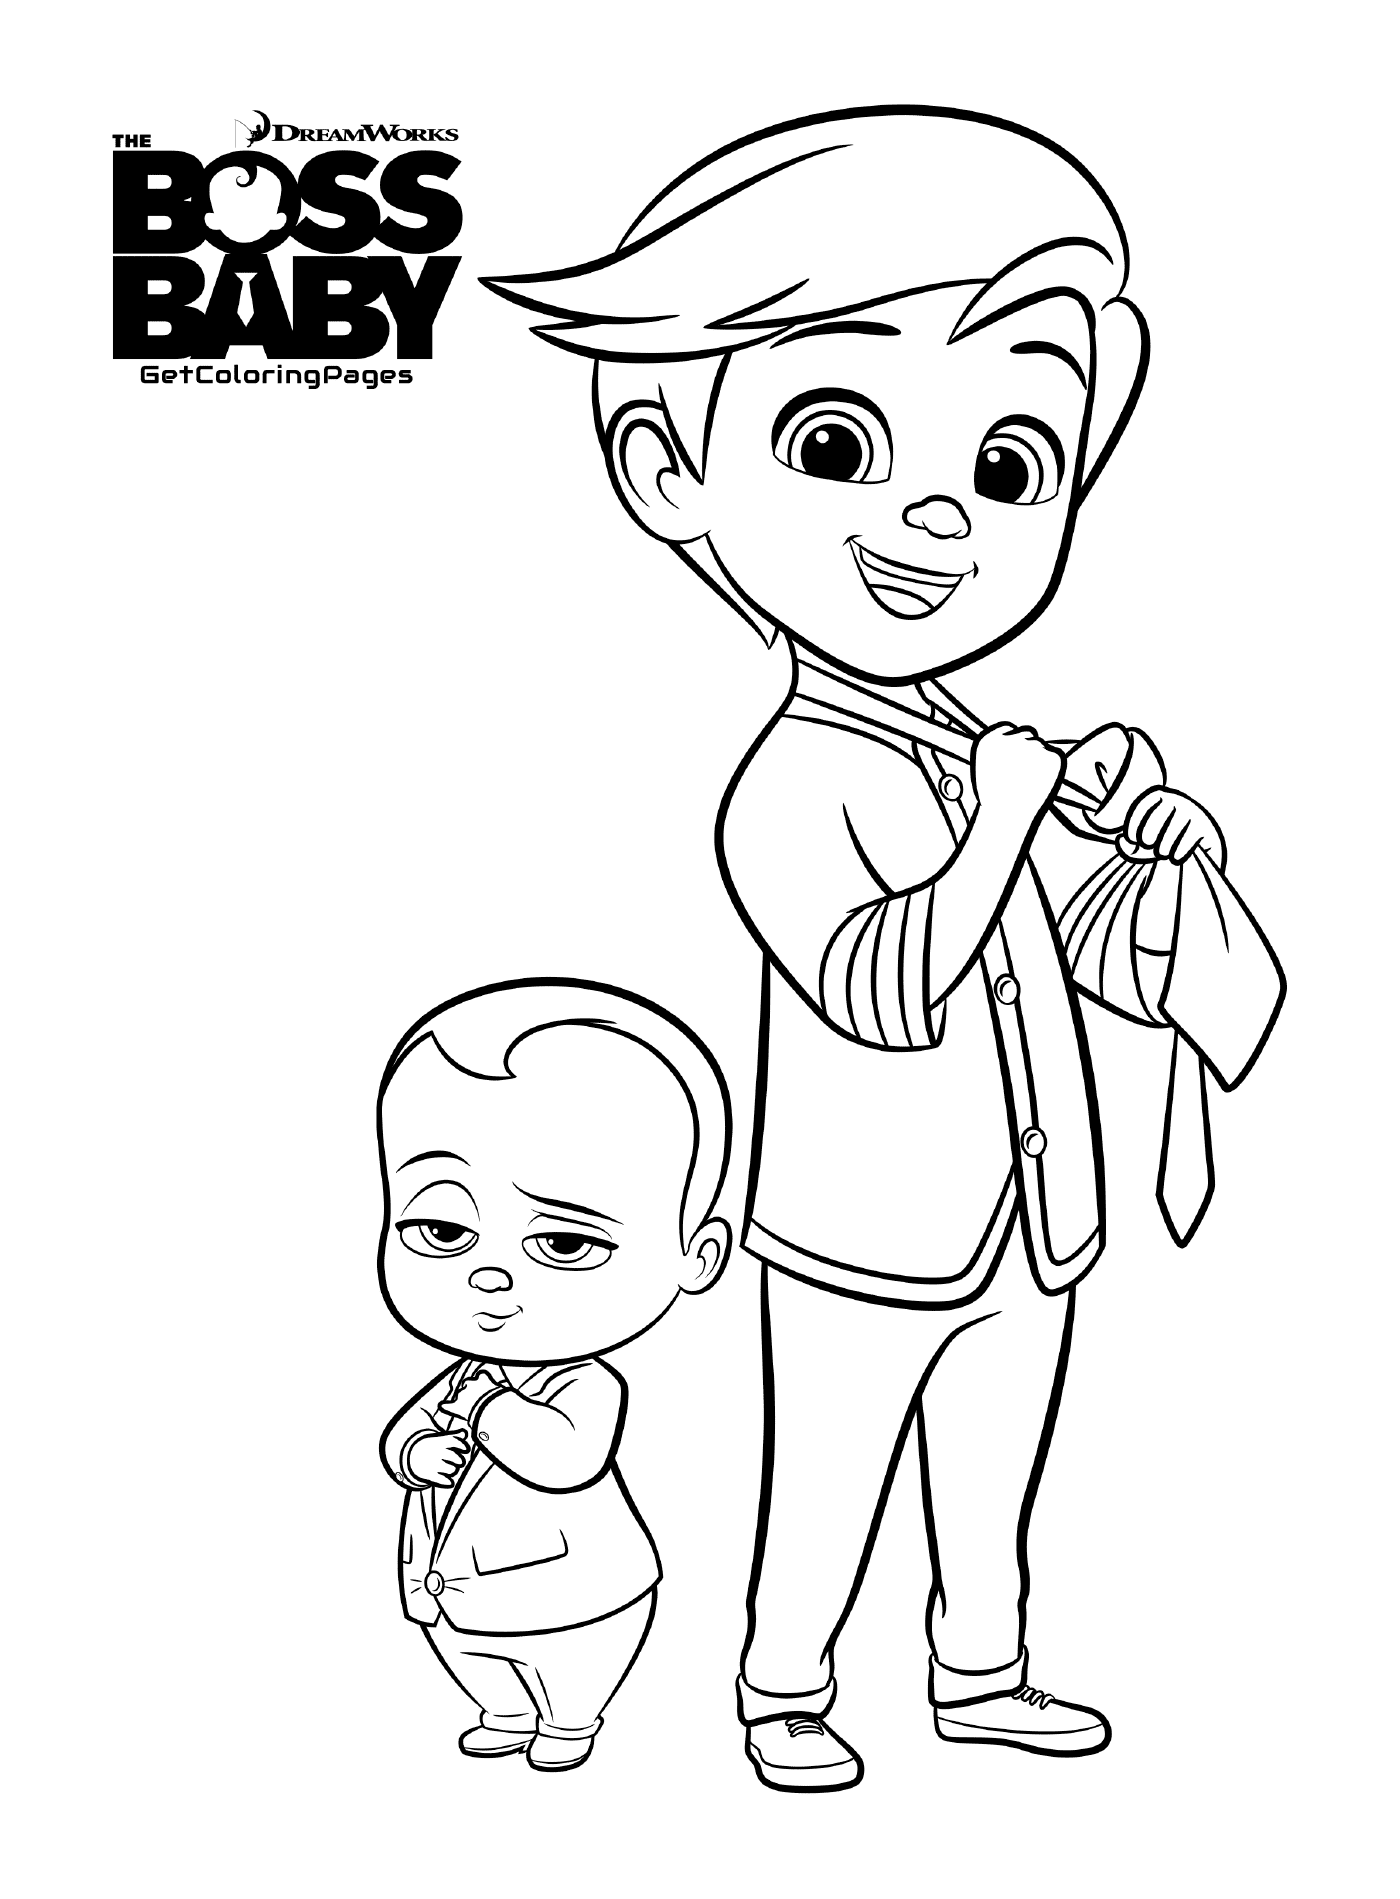  A person and a baby 